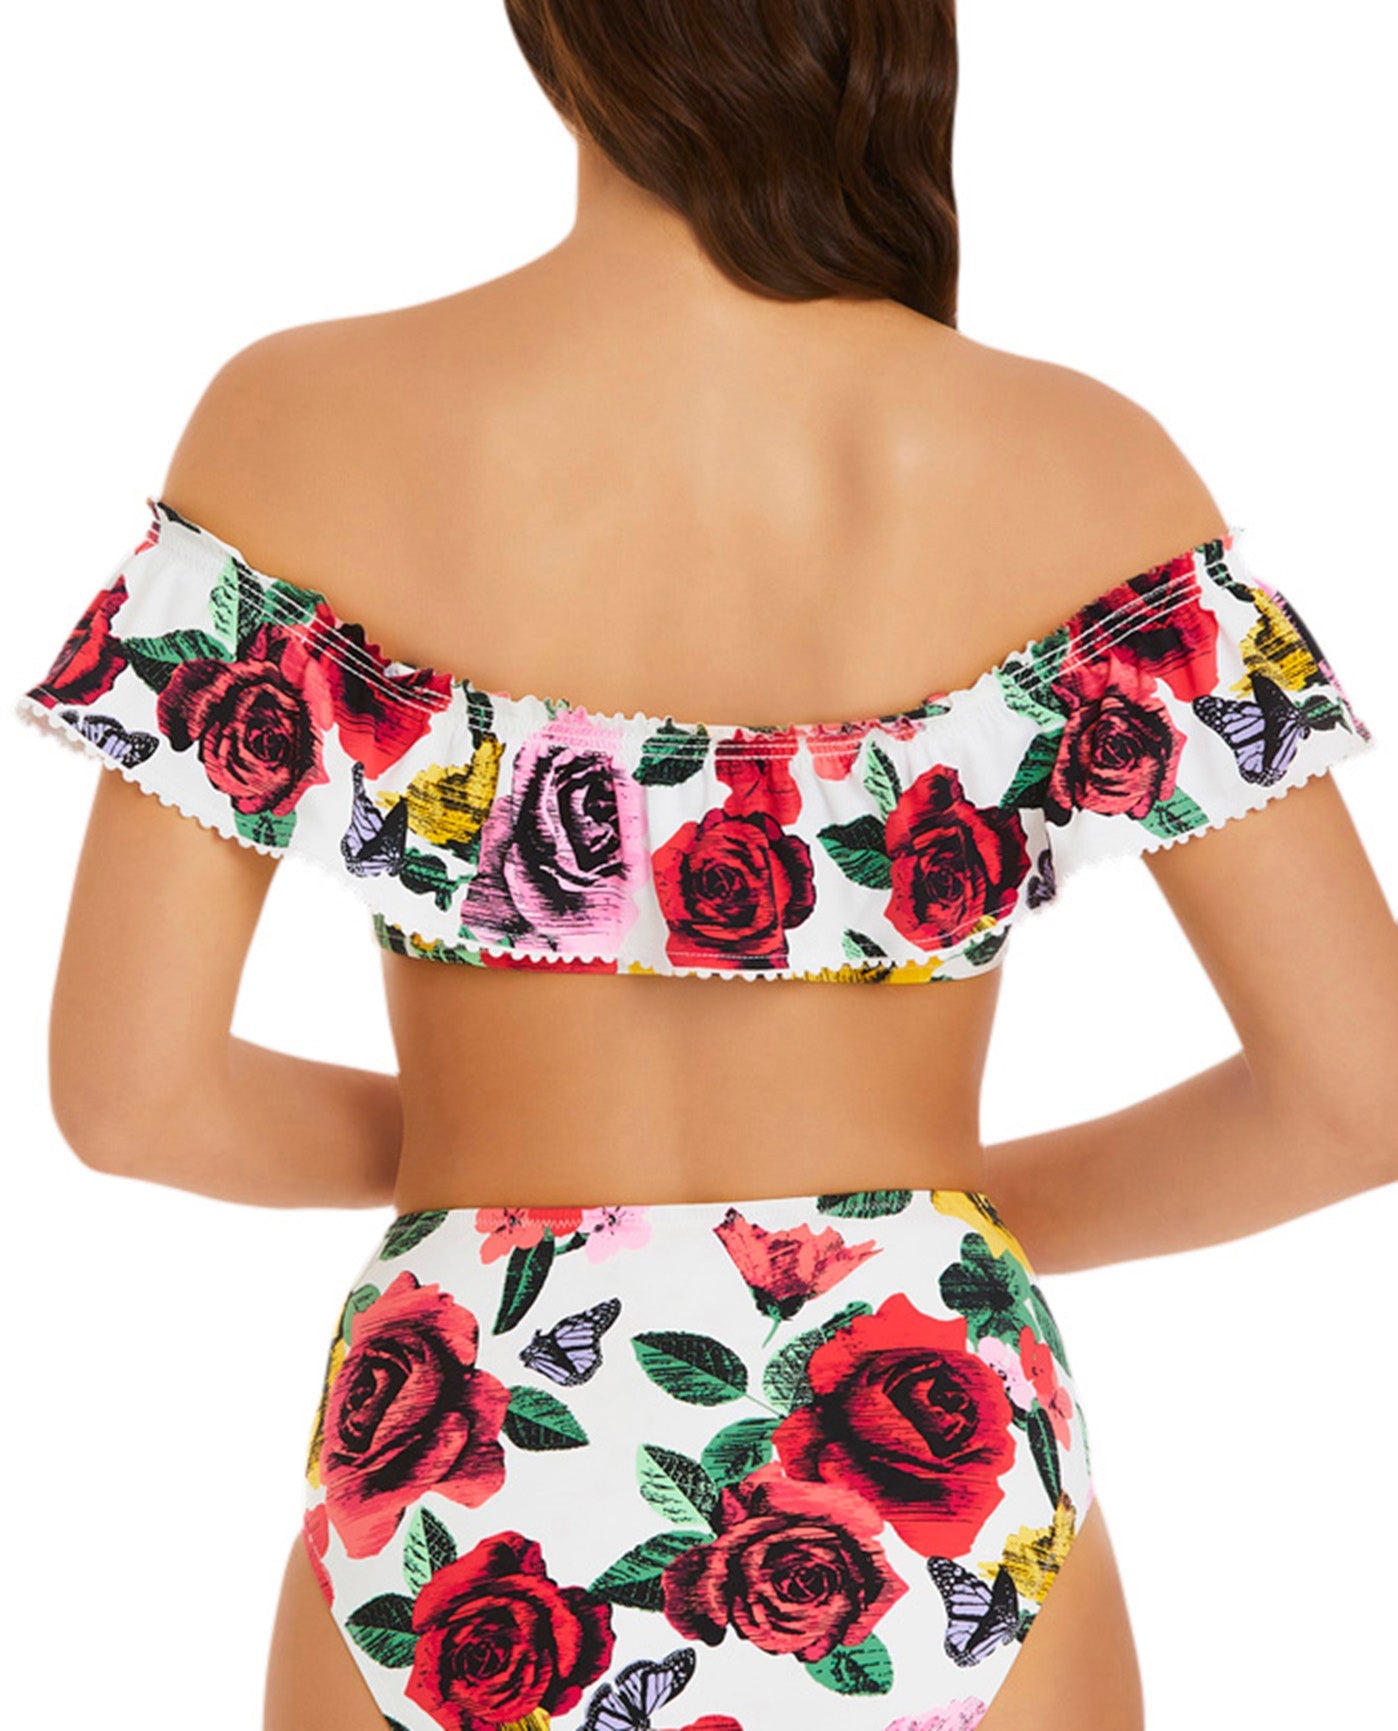 Back View Of Vera Bradley Yes Way Rose Layla Off Shoulder Bandeau Bikini Top | VER YES WAY FLORAL